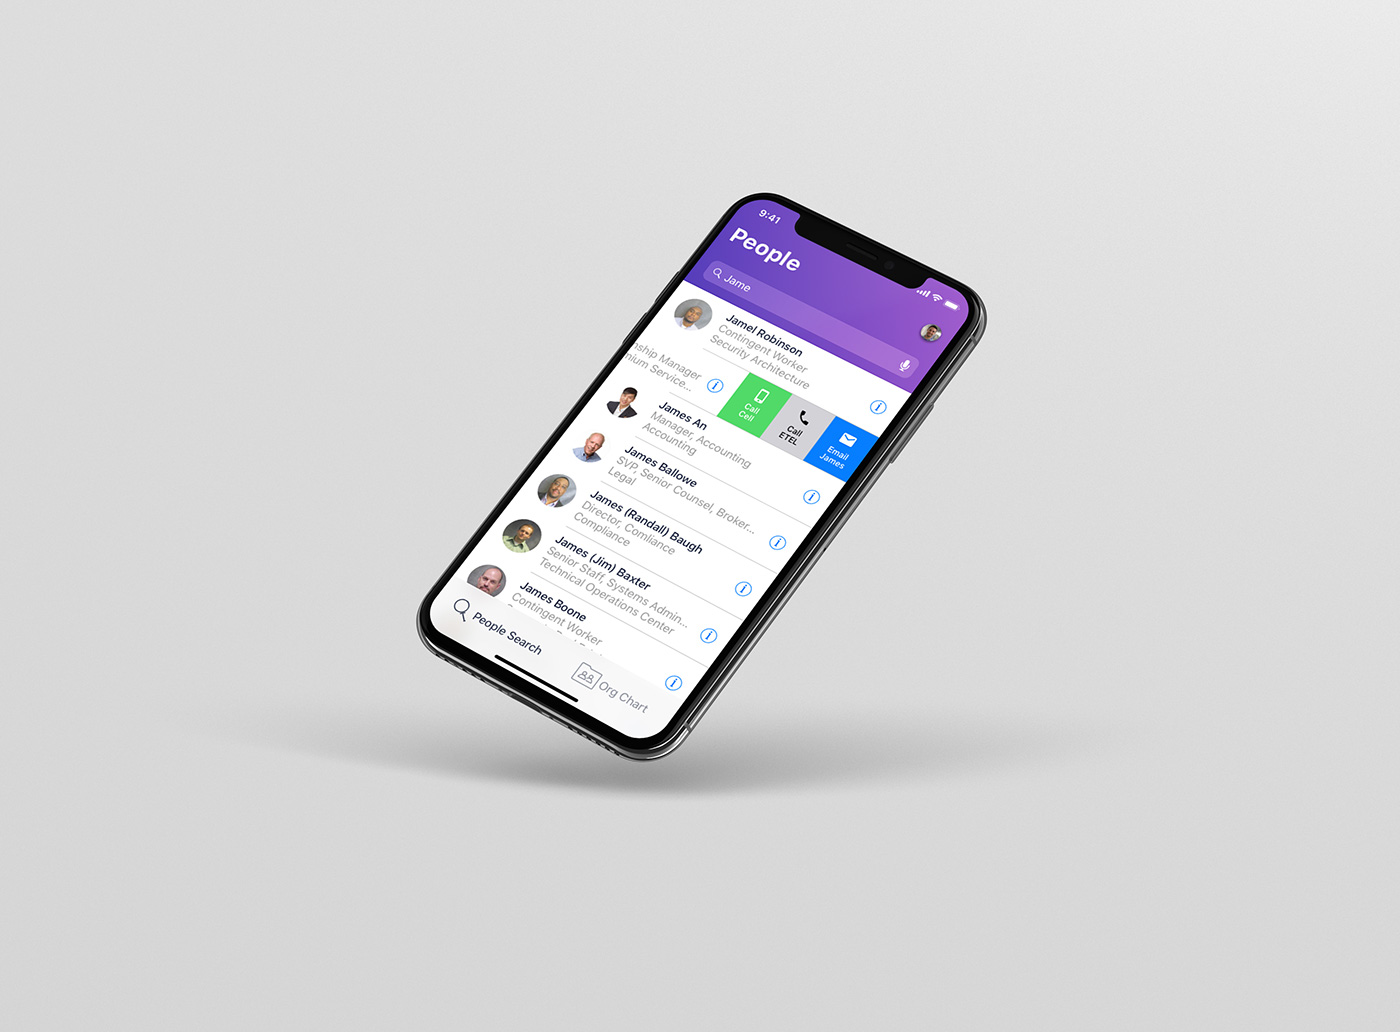 people app mobile ux UI ios 11 iPhone x E*TRADE org chart Interface